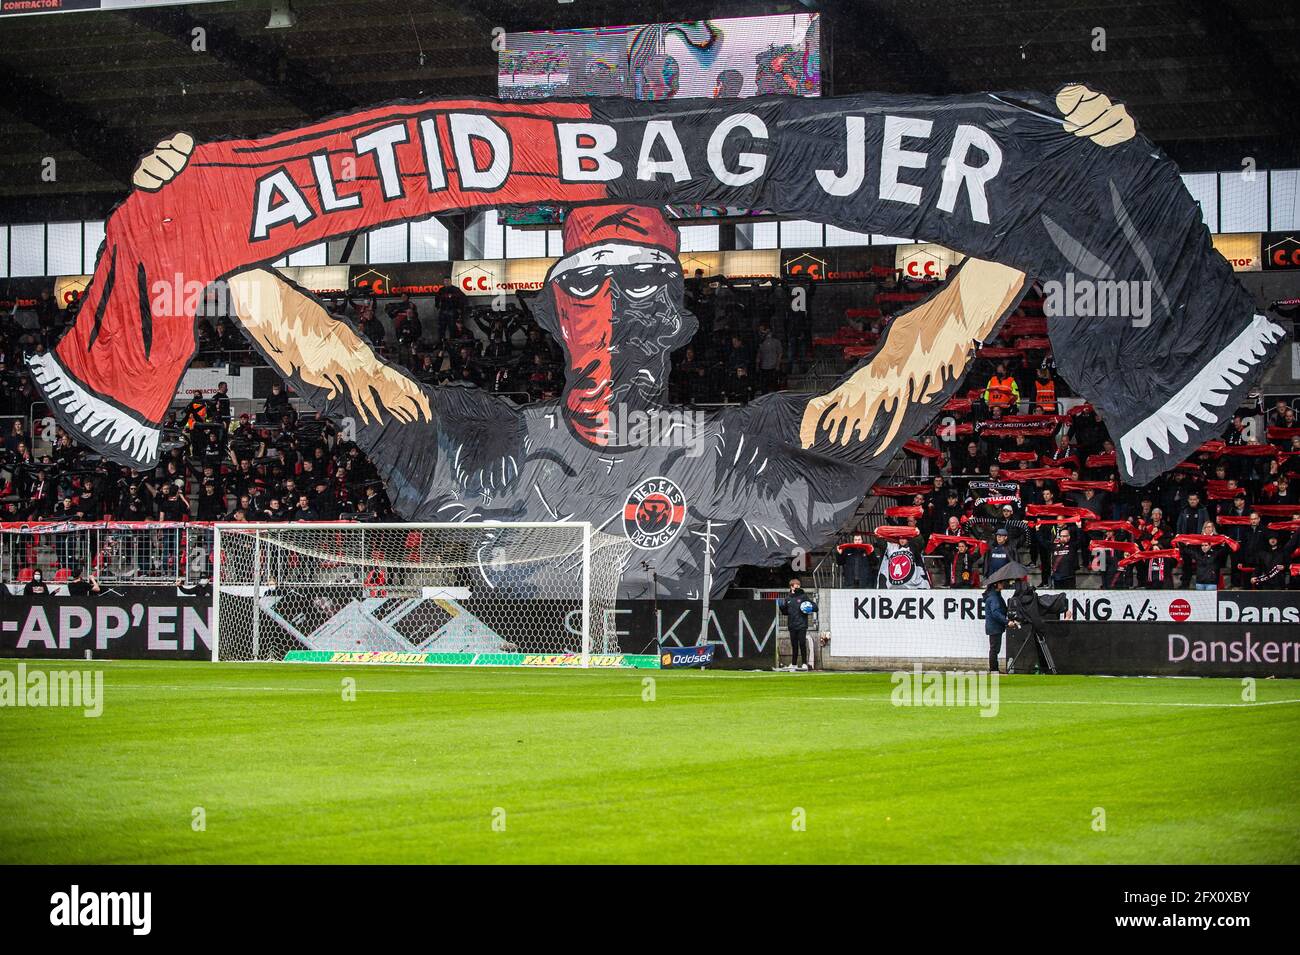 Herning, Denmark. 24th May, 2021. Football fans of FC Midtjylland seen in  the stands with a huge tifo before the 3F Superliga match between FC  Midtjylland and Aarhus GF at MCH Arena